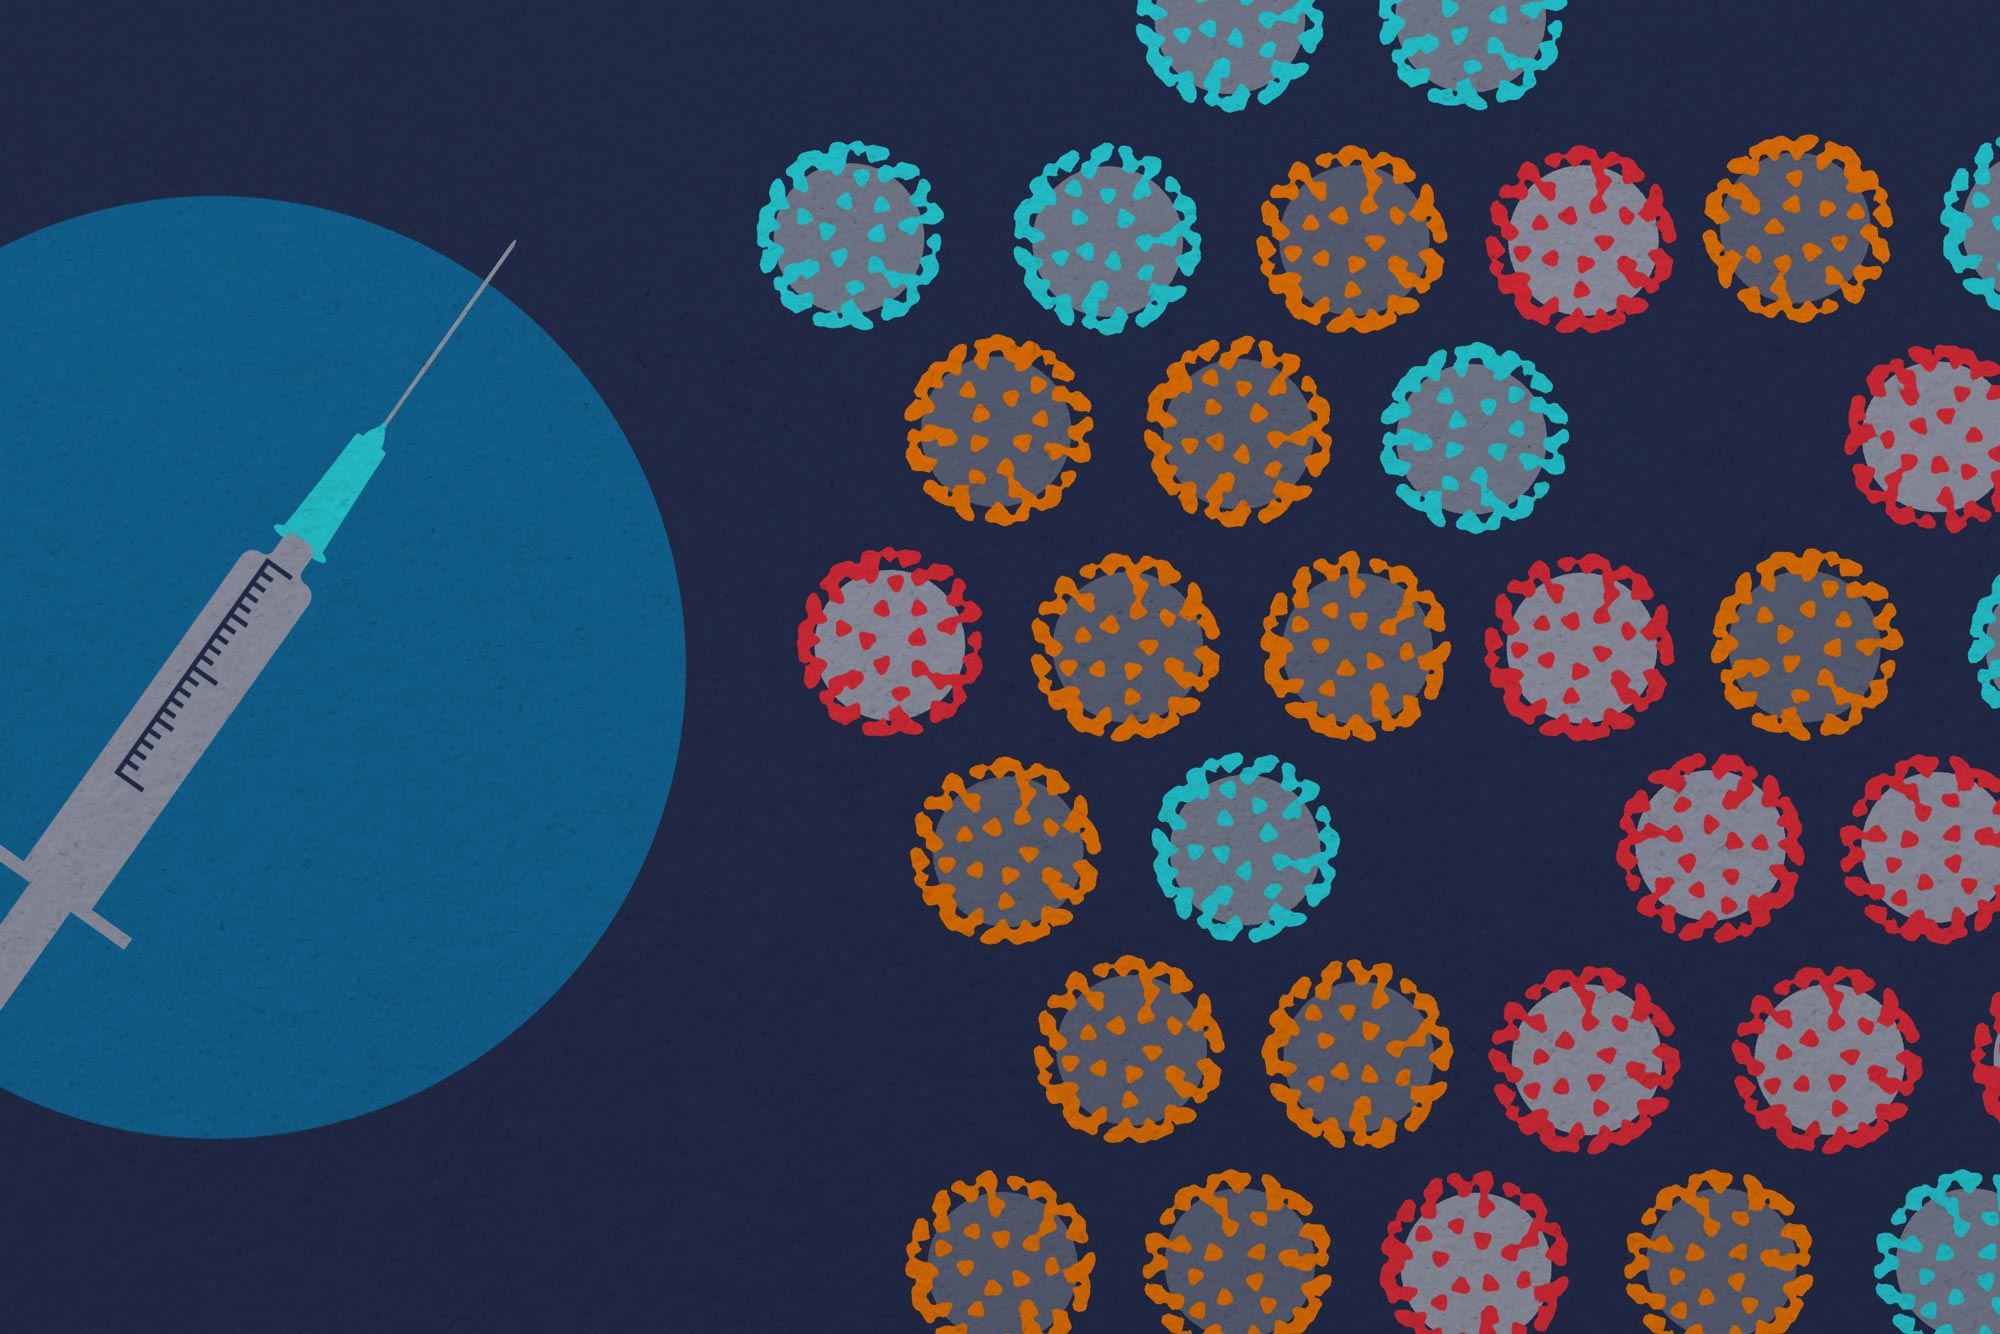 Illustration with a syringe and covid-19 viruses on the right